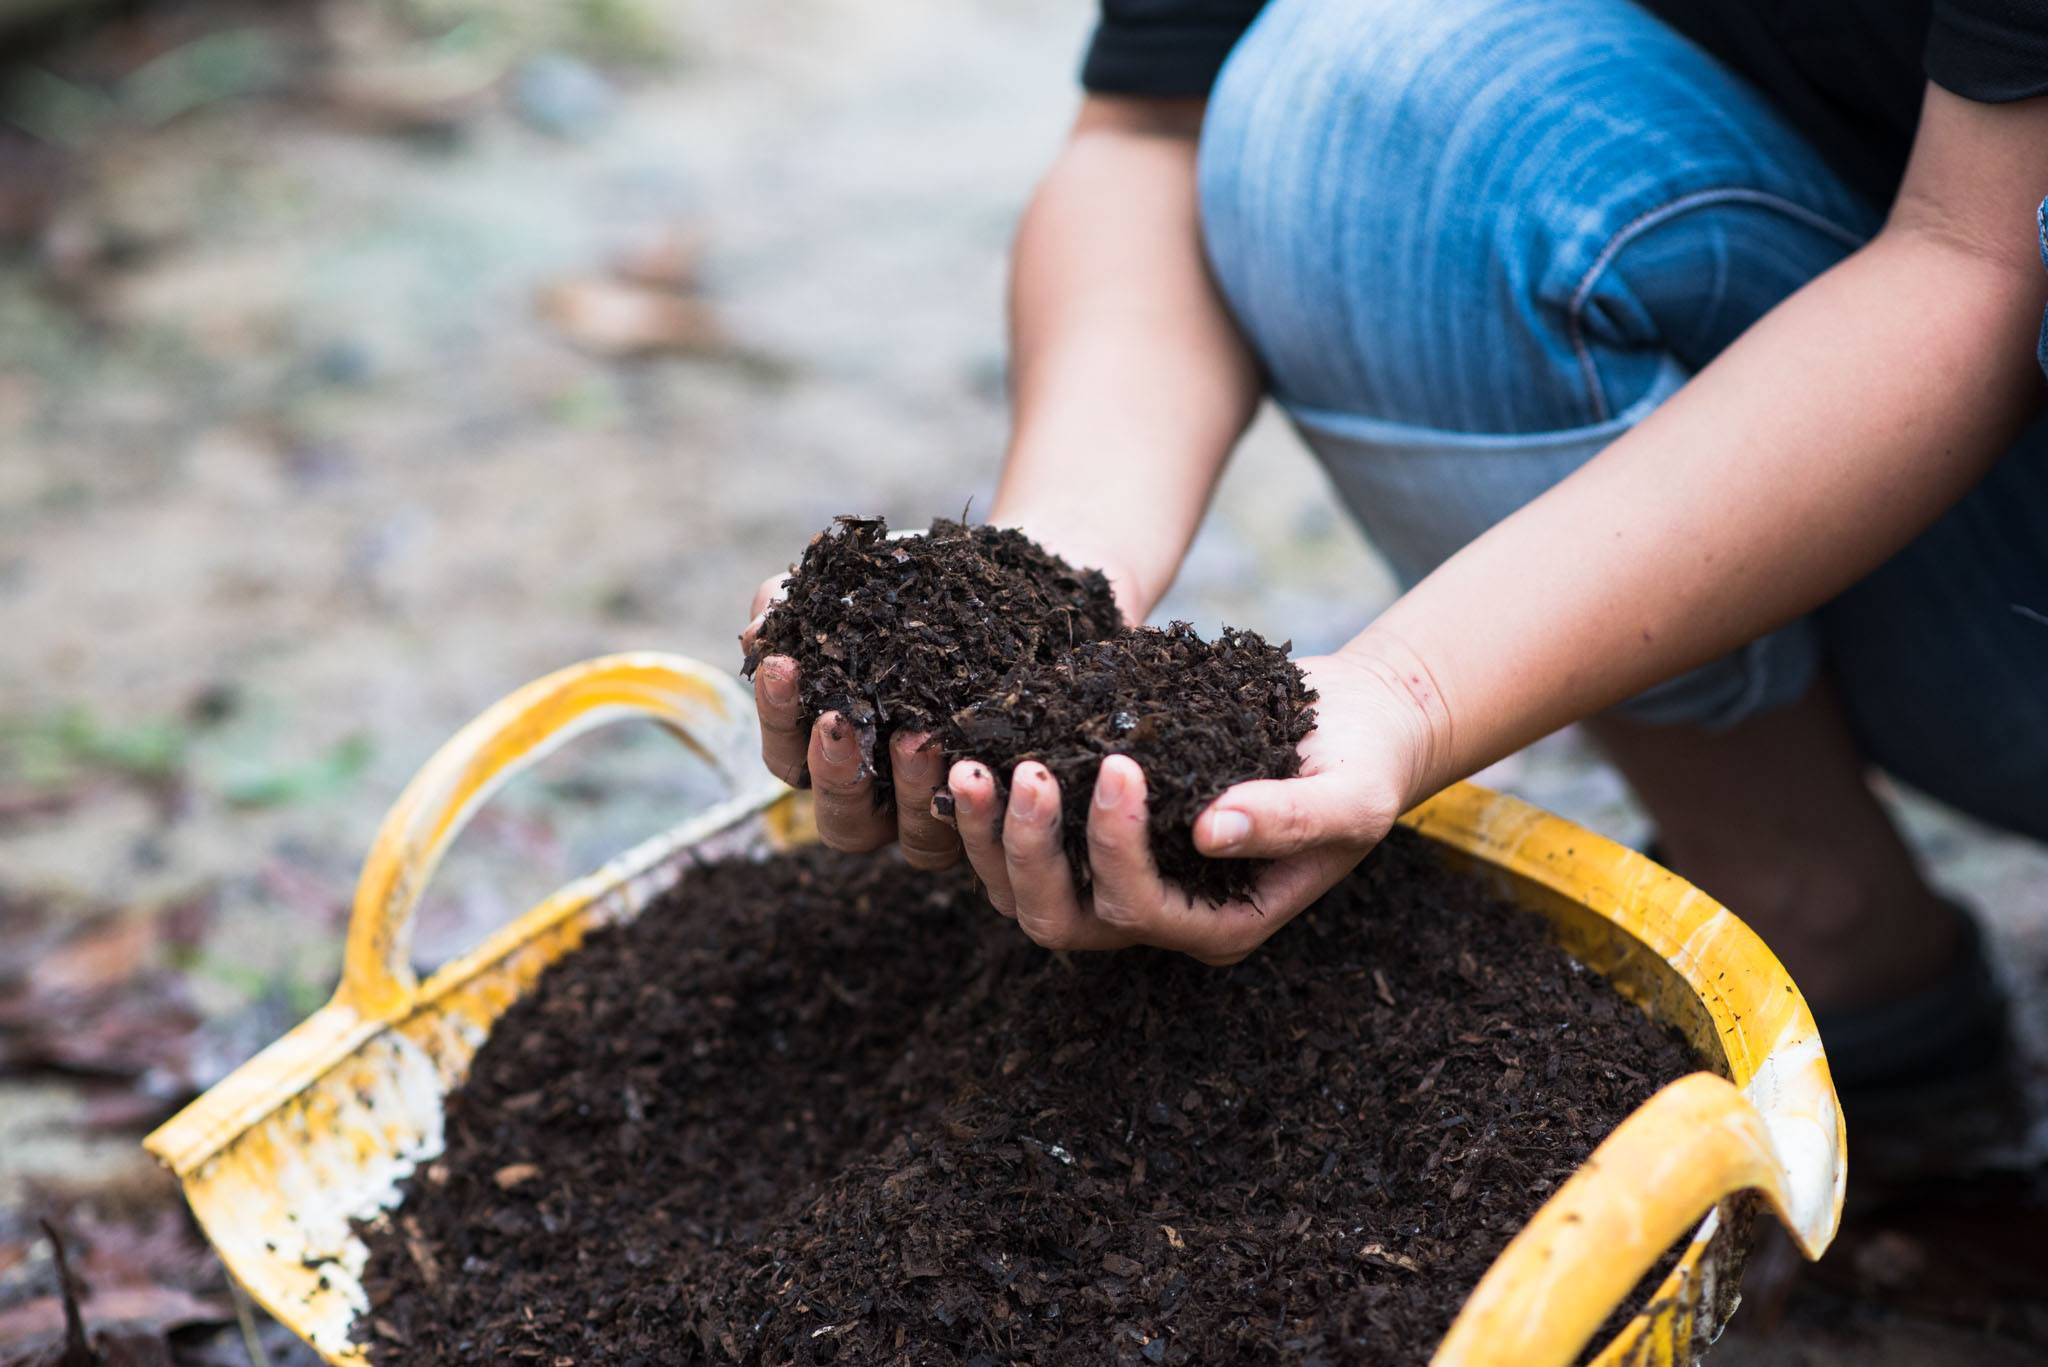 The long-term benefits of compost include the improvement of soil properties physically (structurally), chemically (nutritionally), and biologically. Organic compost also suppresses plant diseases, binds contaminants, degrades compounds, provides wetland restoration, and controls erosion and weeds.